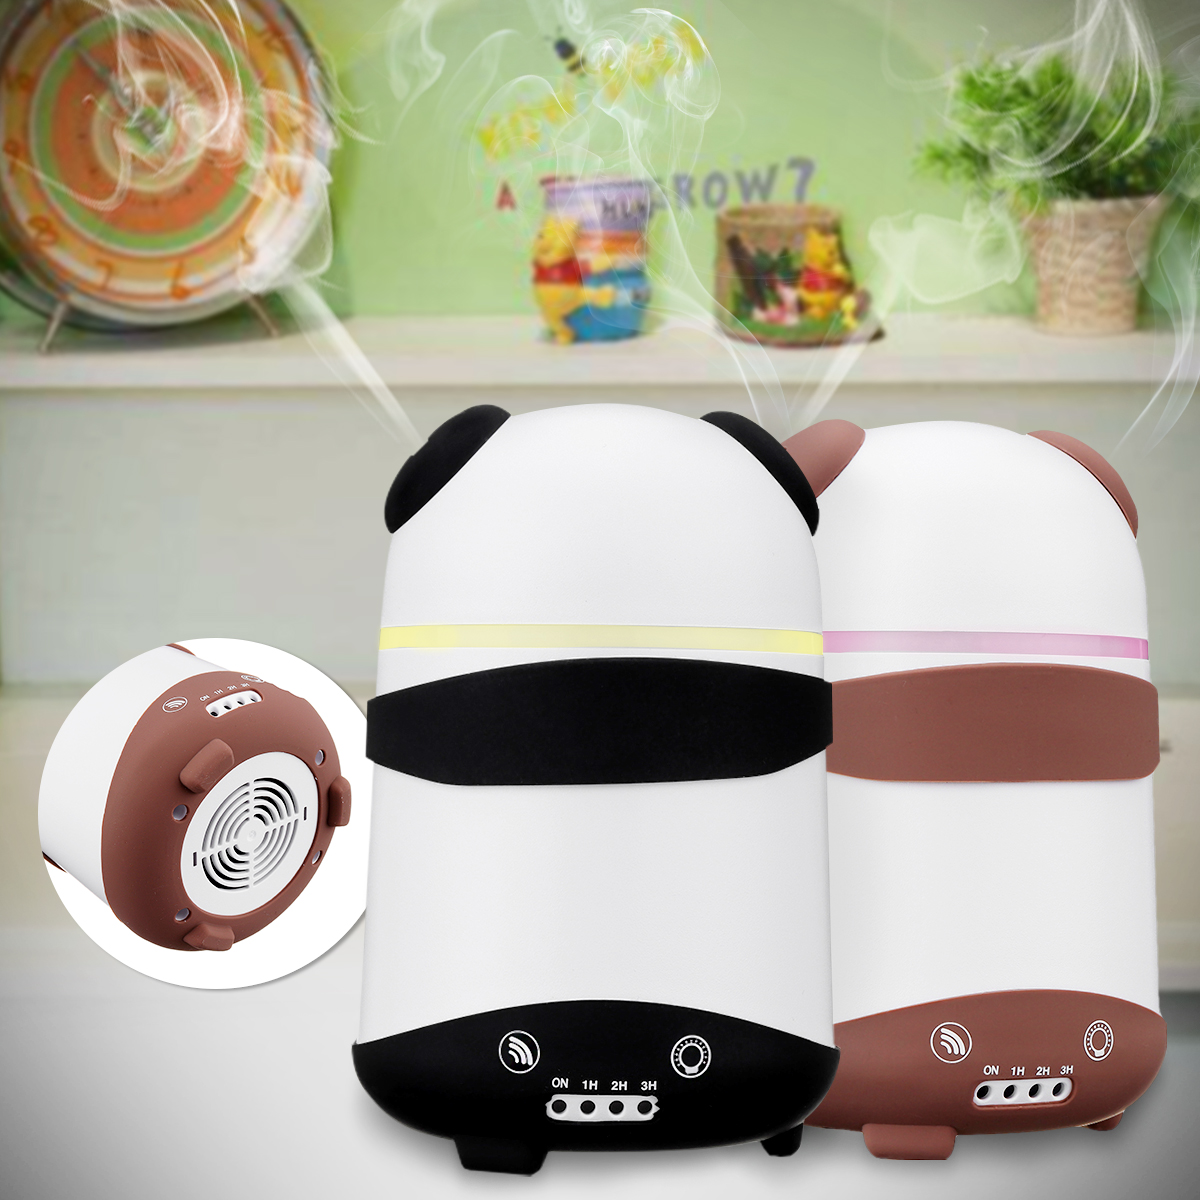 Dual Humidifier Air Oil Diffuser Aroma Mist Maker LED Cartoon Panda Style For Home Office US Plug 12